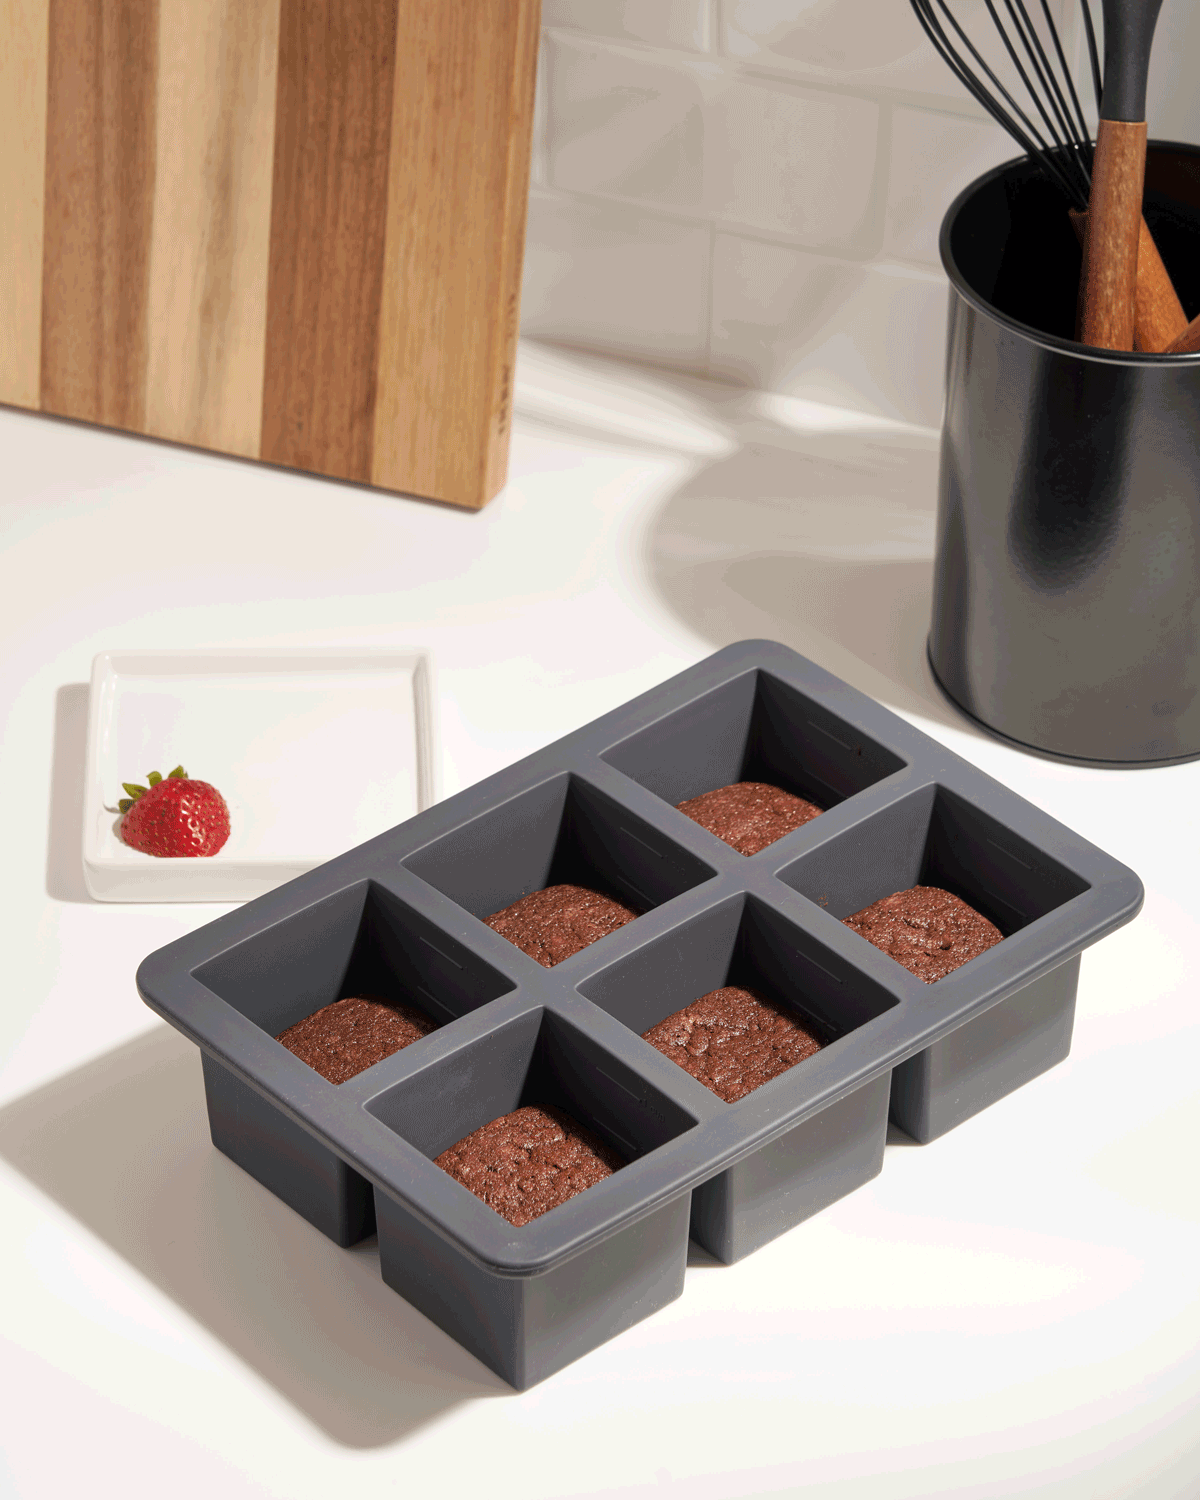 W & P | Cup Cubes Freezer Tray - 6 Cubes Blue / One Tray